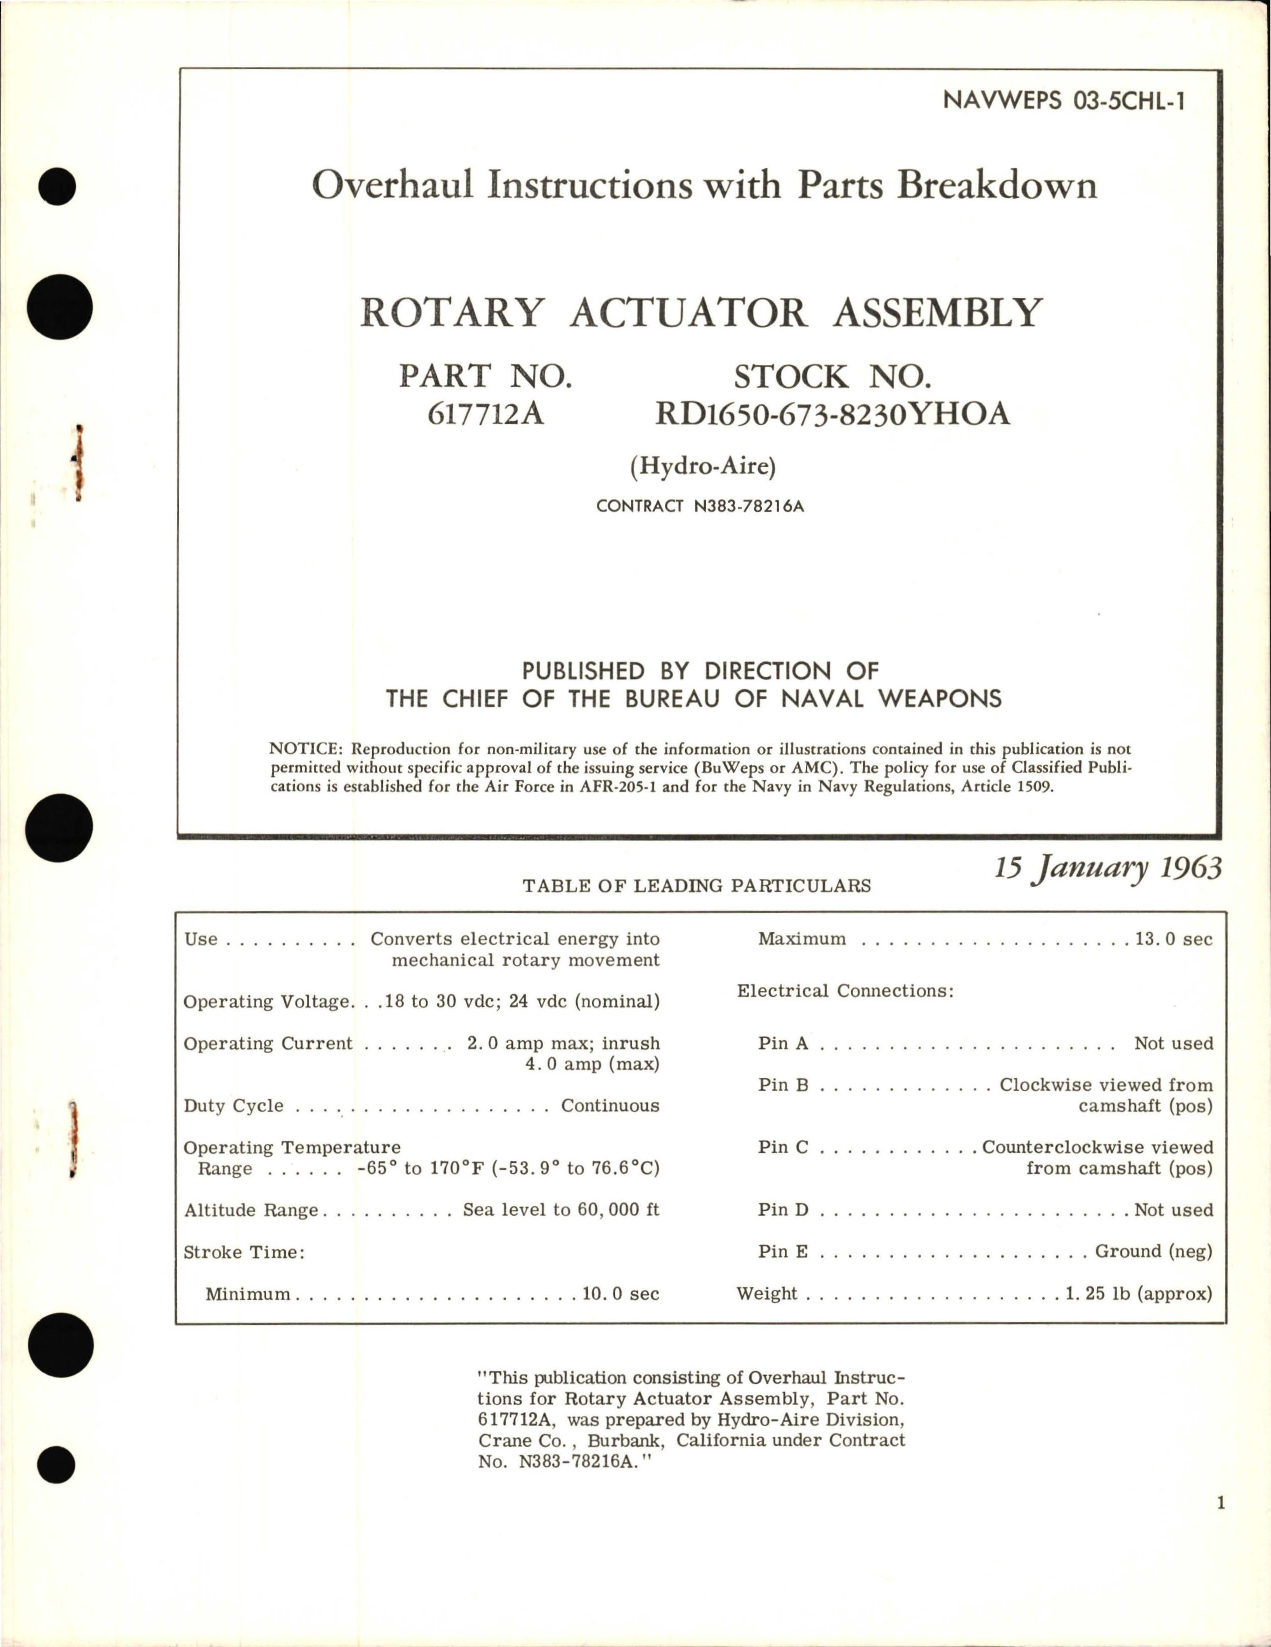 Sample page 1 from AirCorps Library document: Overhaul Instructions with Parts Breakdown for Rotary Actuator Assembly 617712A